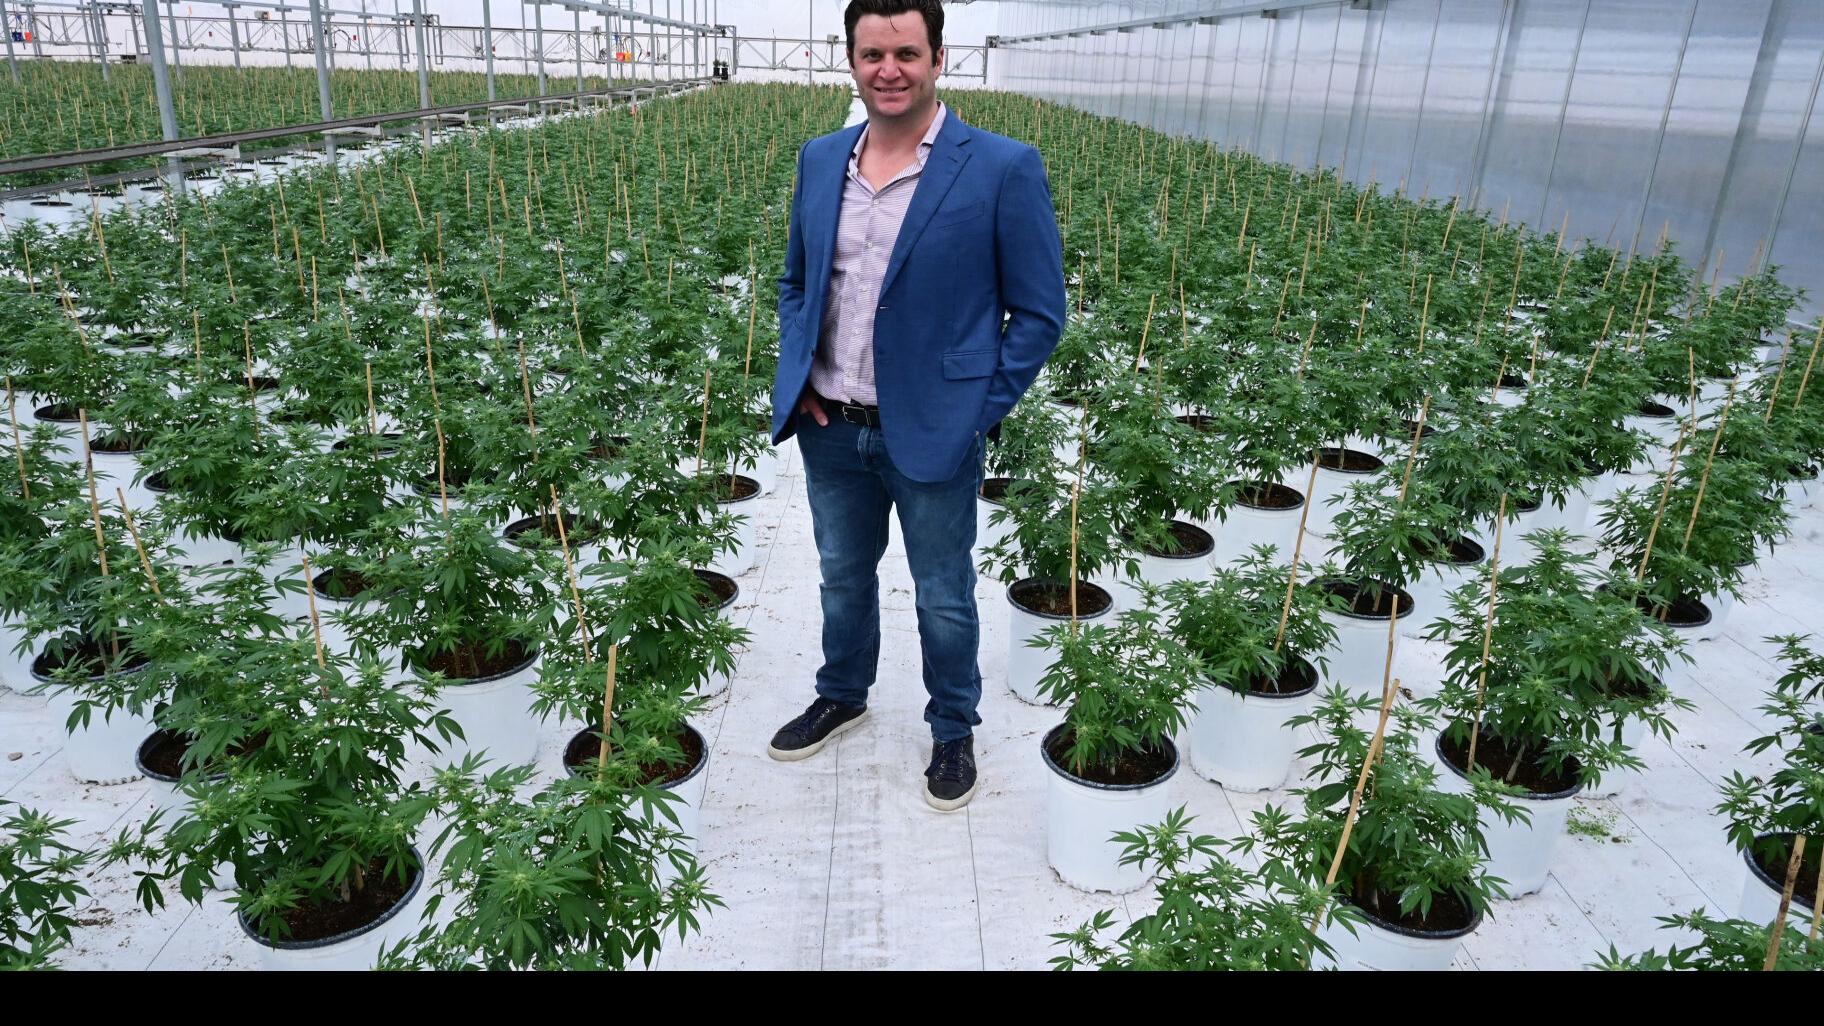 Hawthorne And Flowr Pioneering Private Cannabis Research In North America -  Greenhouse Grower